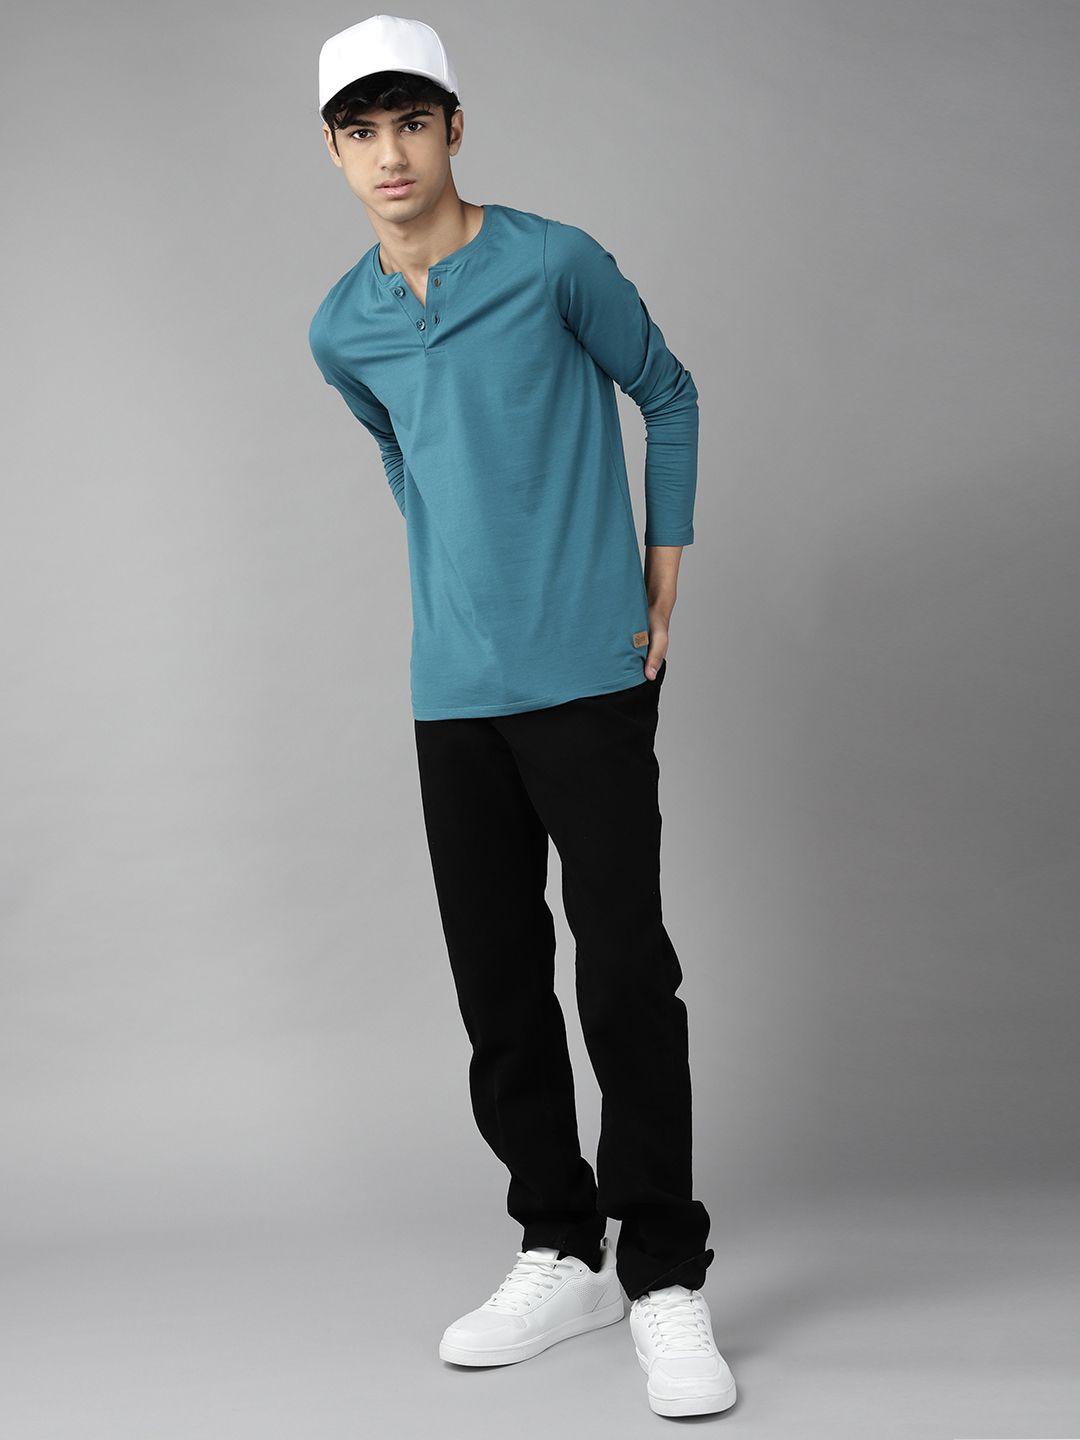 uth by roadster boys teal blue henley neck solid t-shirt